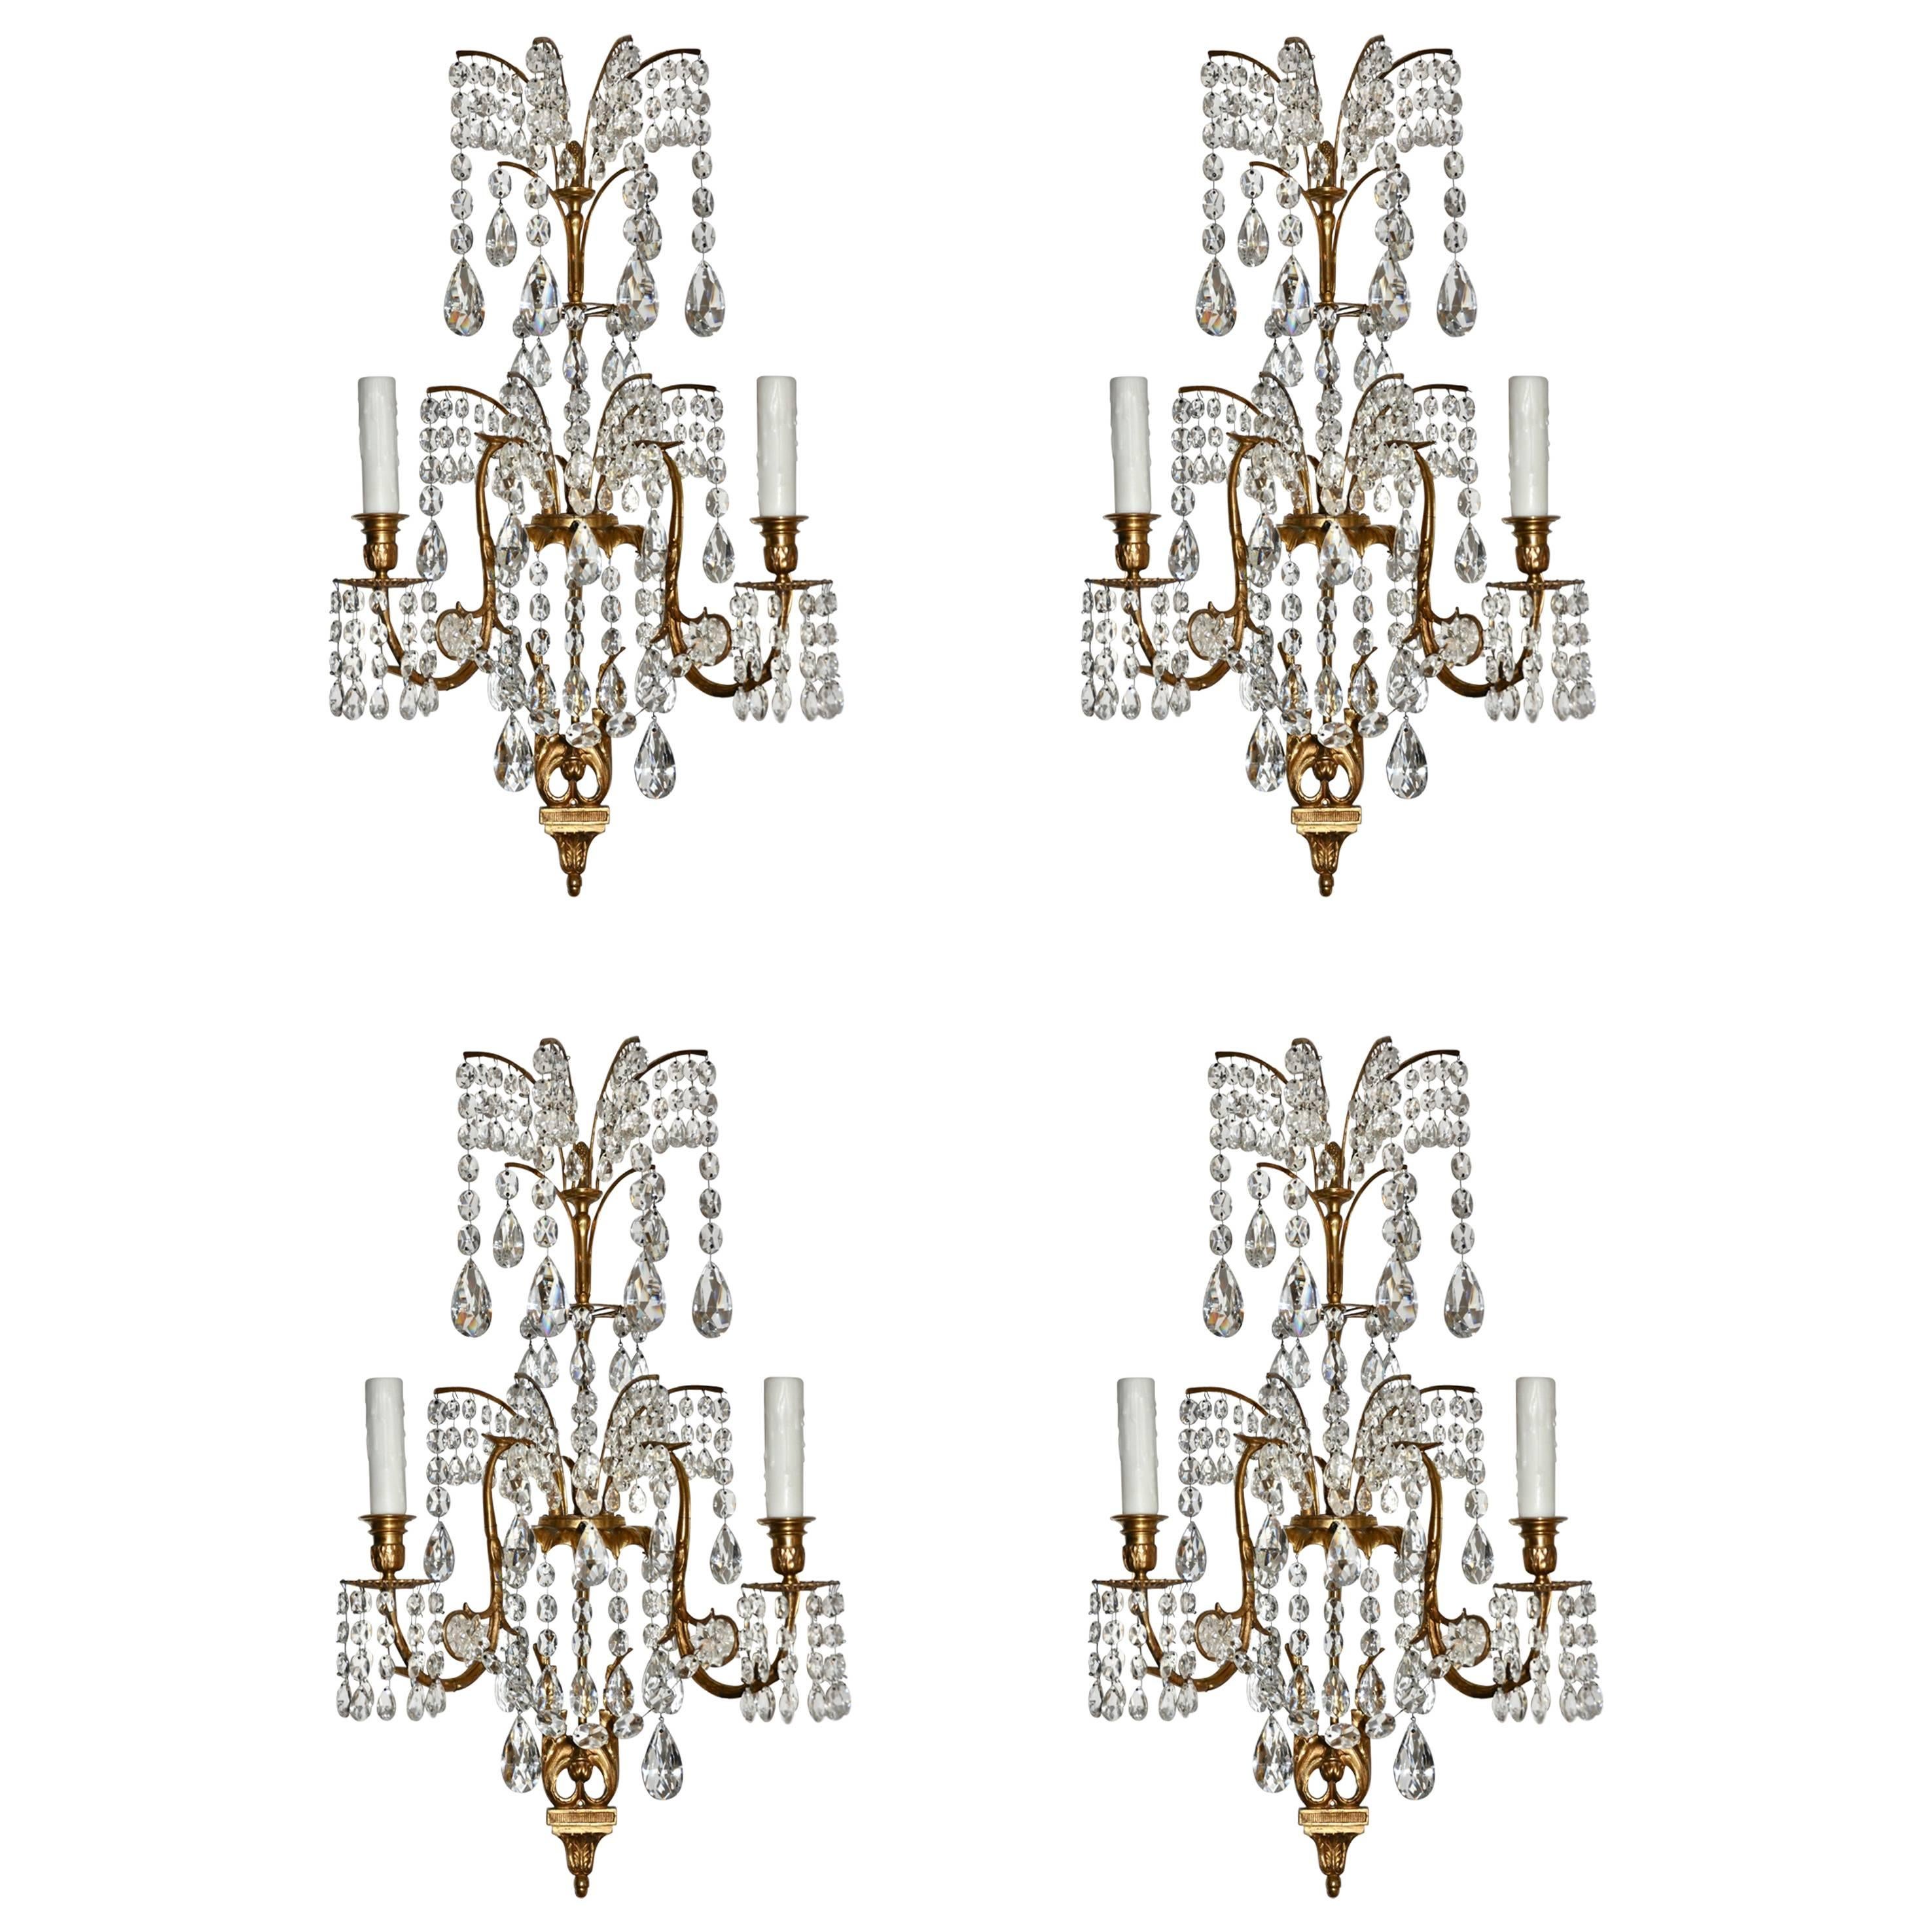 Set of Four 19th Century Neoclassical Sconces in Manner of Schinkel